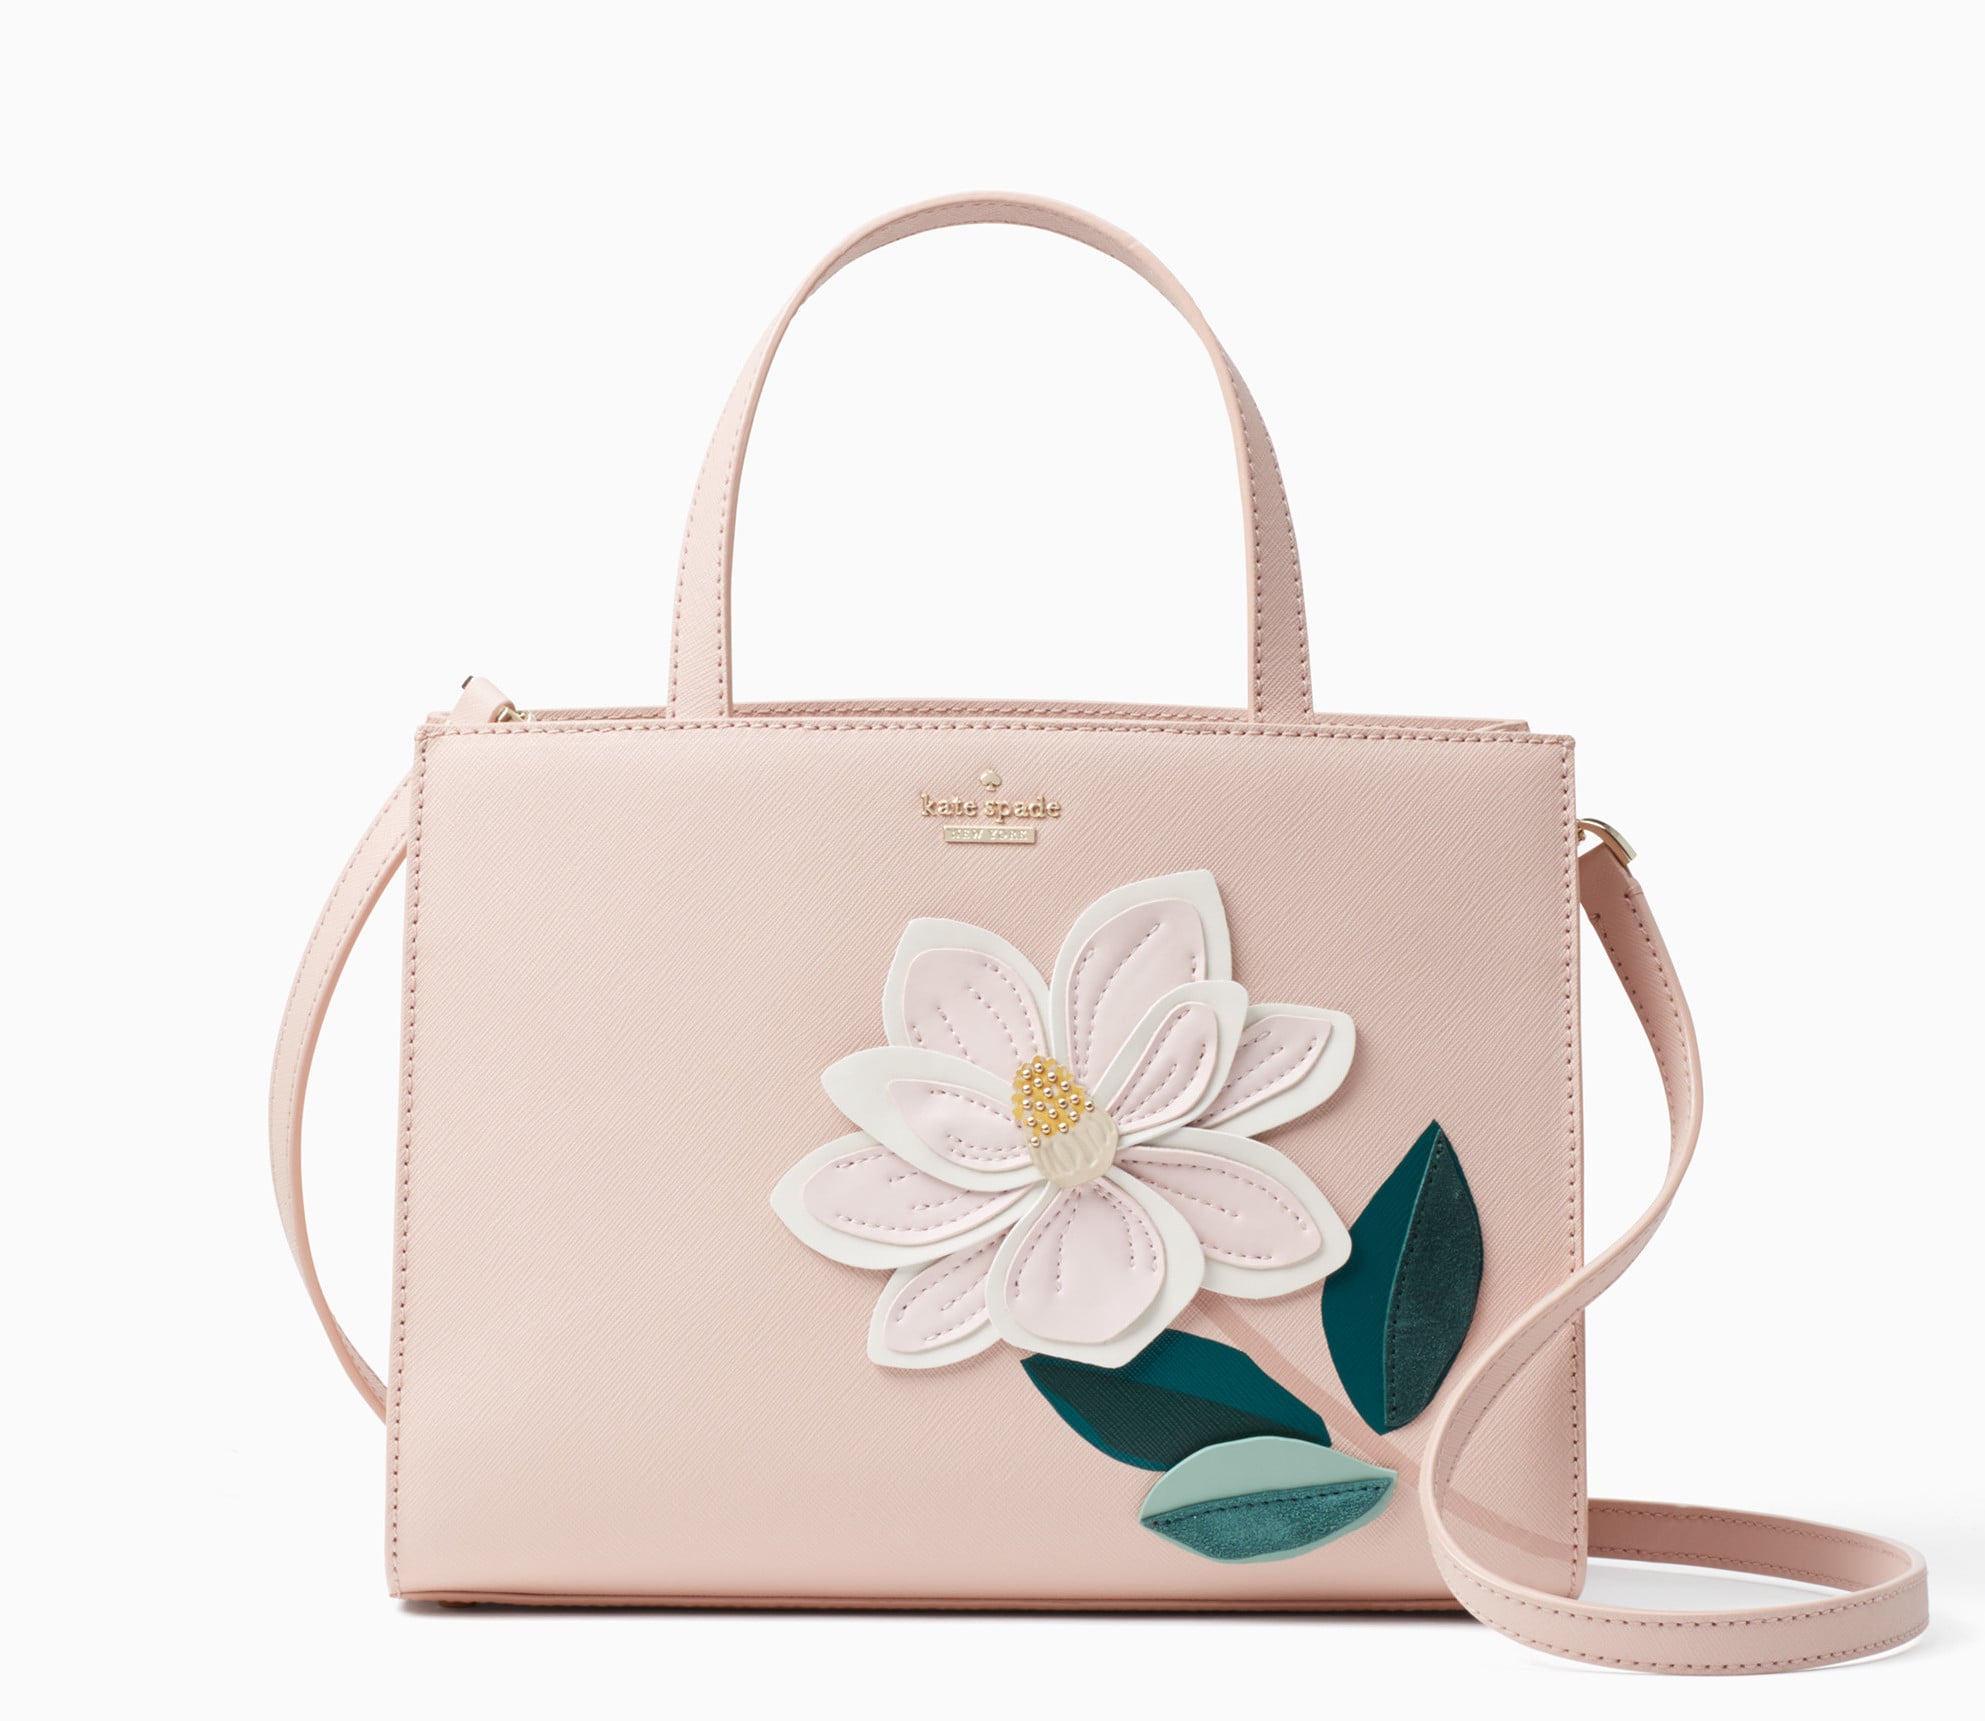 Kate Spade's Iconic Sam Bag Is Coming Back in Spring 2018